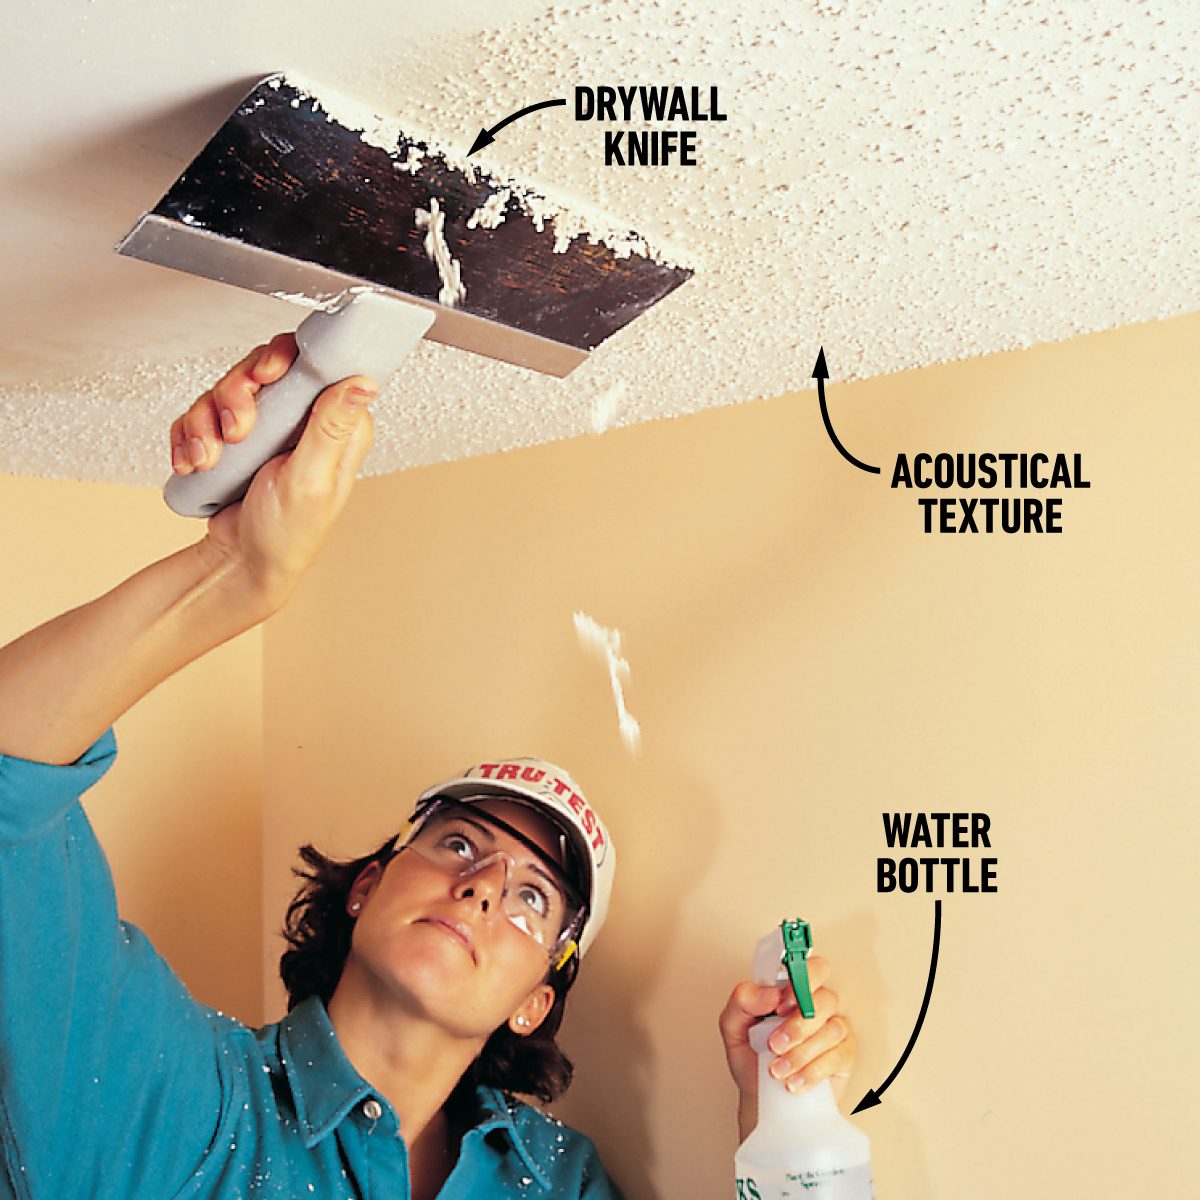 Scrape A Textured Ceiling With A Drywall Knife